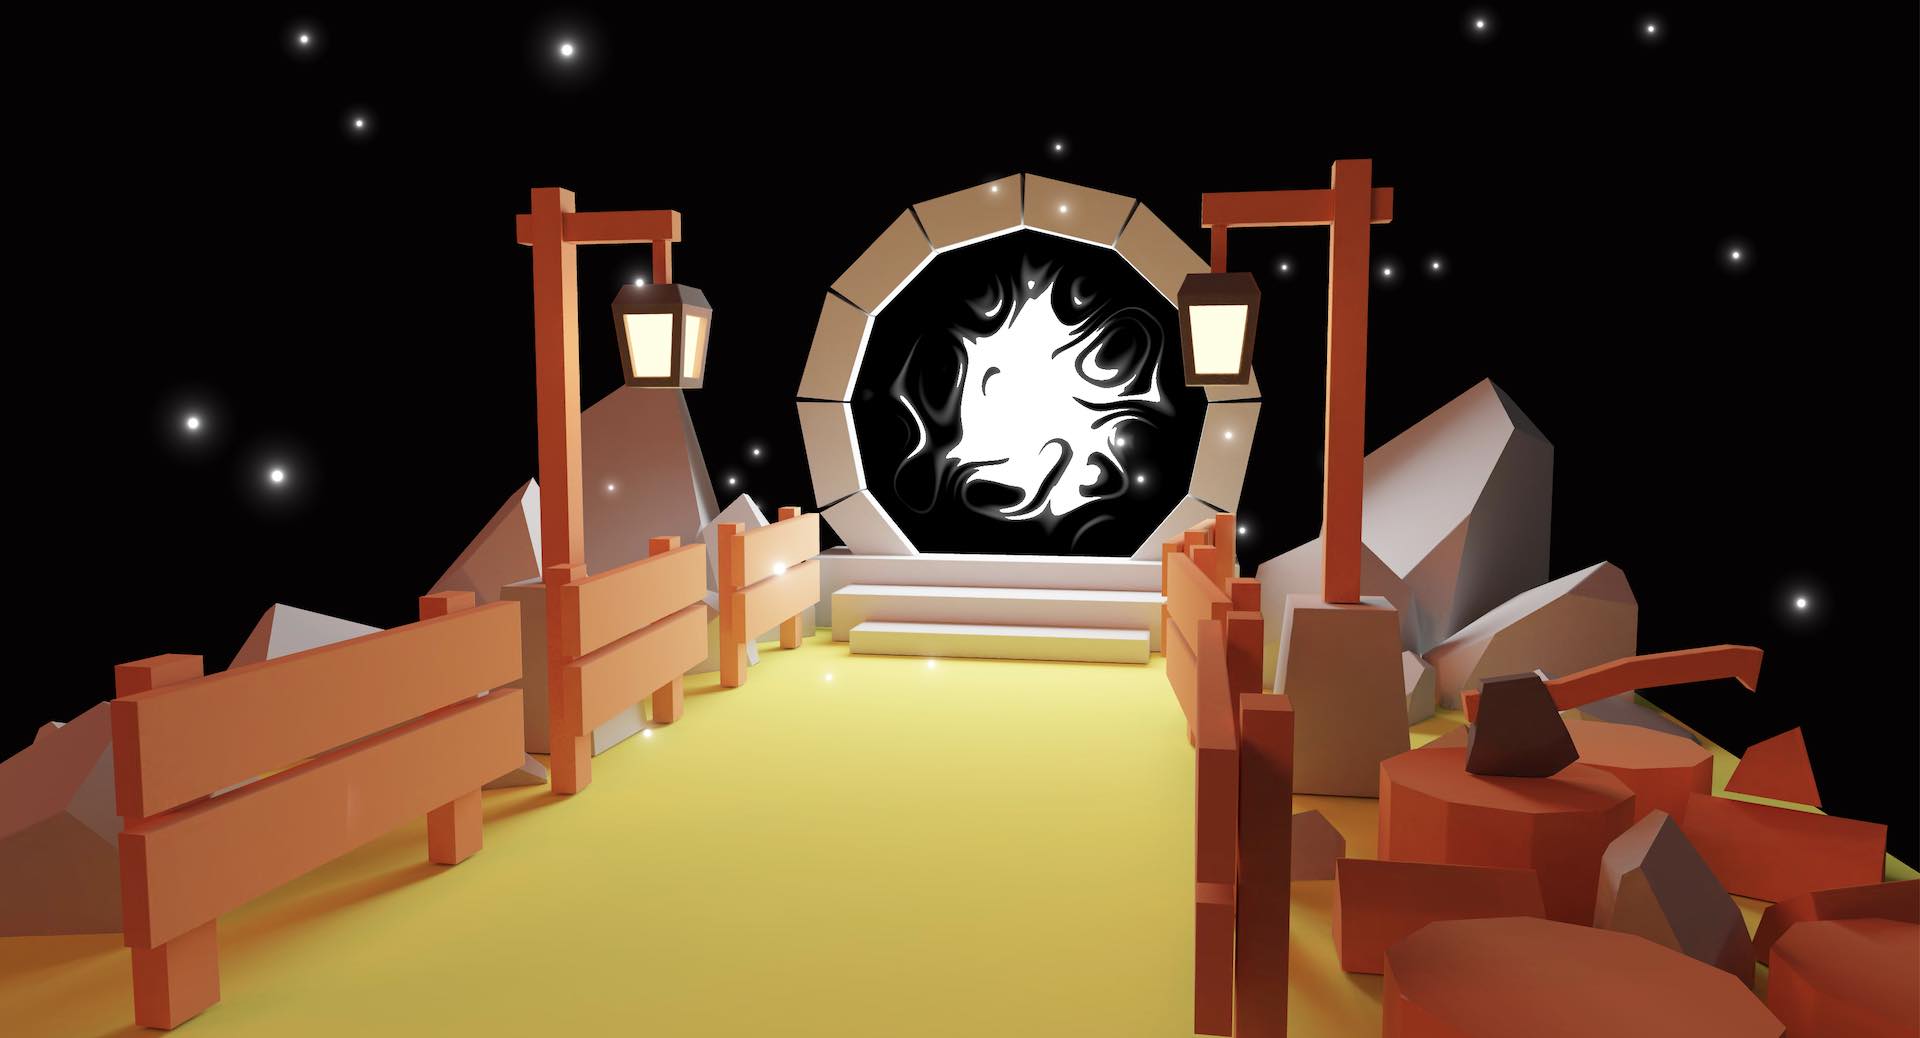 A 3D image depicting a stylized portal with swirling black and white patterns in the center, flanked by wooden structures with lanterns, against a starry night sky backdrop, suggesting a mystical or fantasy setting.